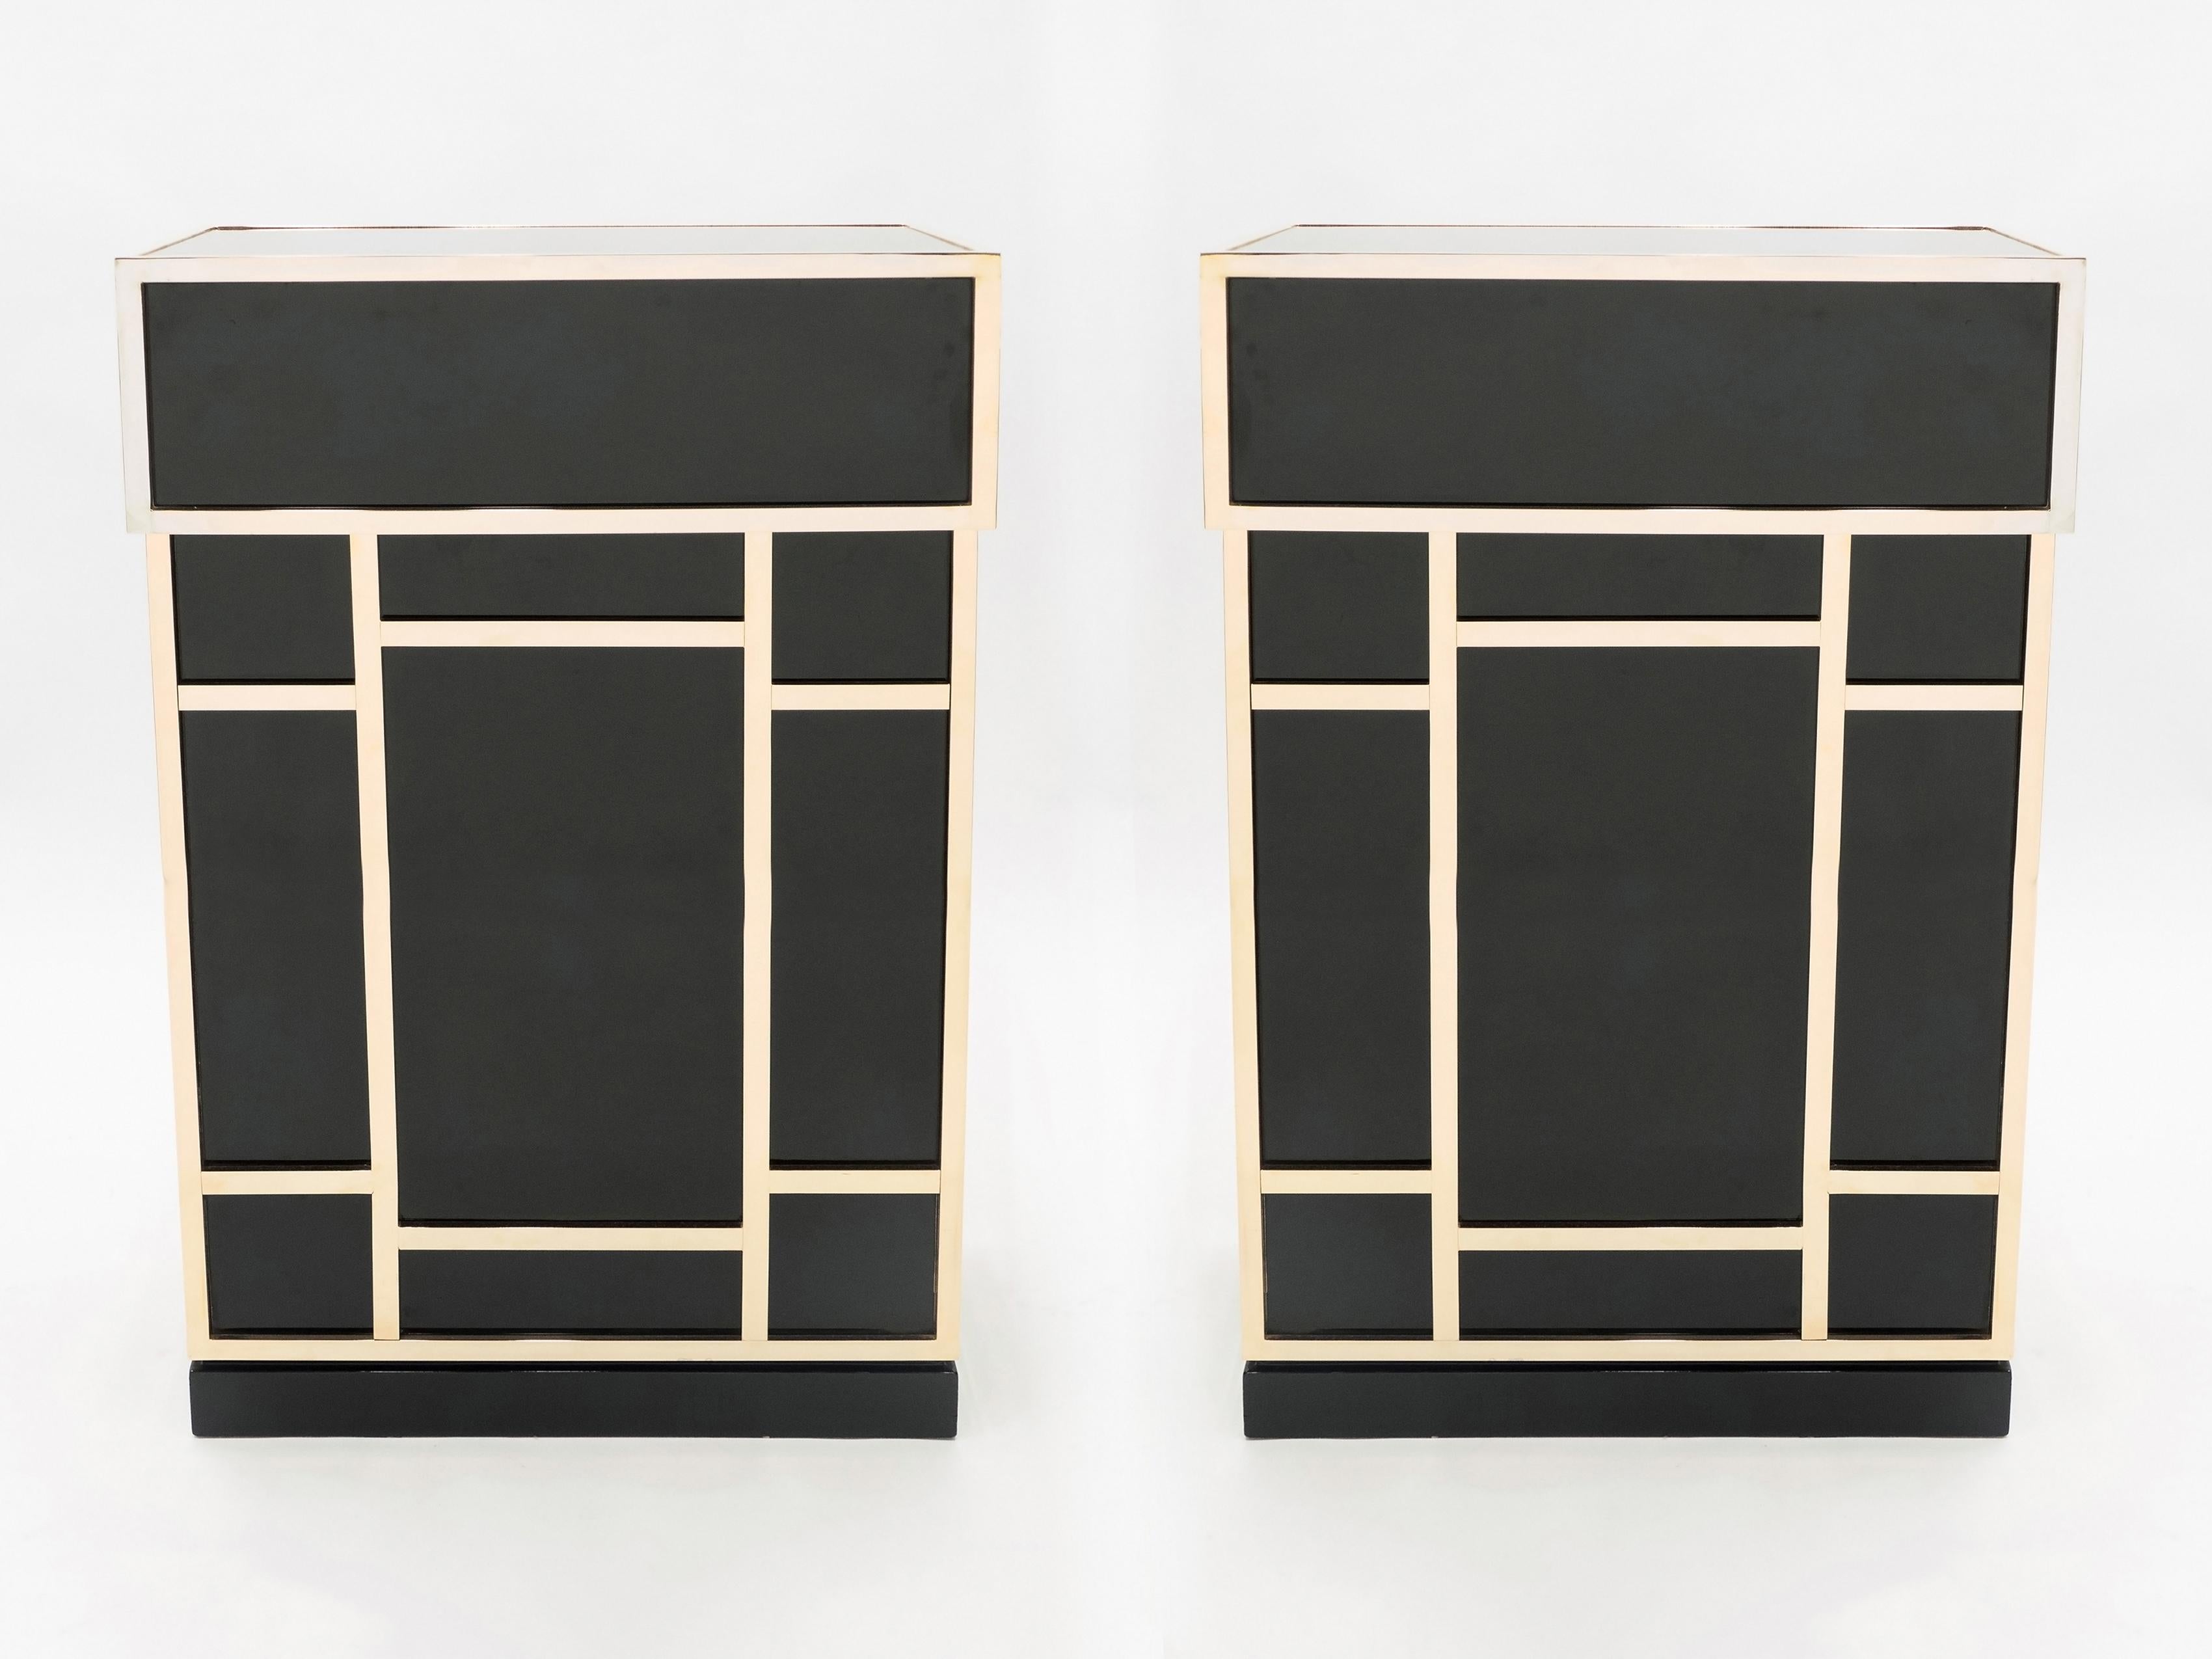 Timeless vintage pieces, this pair of mid-century dry bar elements feel imposing and glamourous, with thick, straight lines of brass adorning its exterior of reflective black lacquer. Glossy black lacquer, paired with bright brass accents, feels